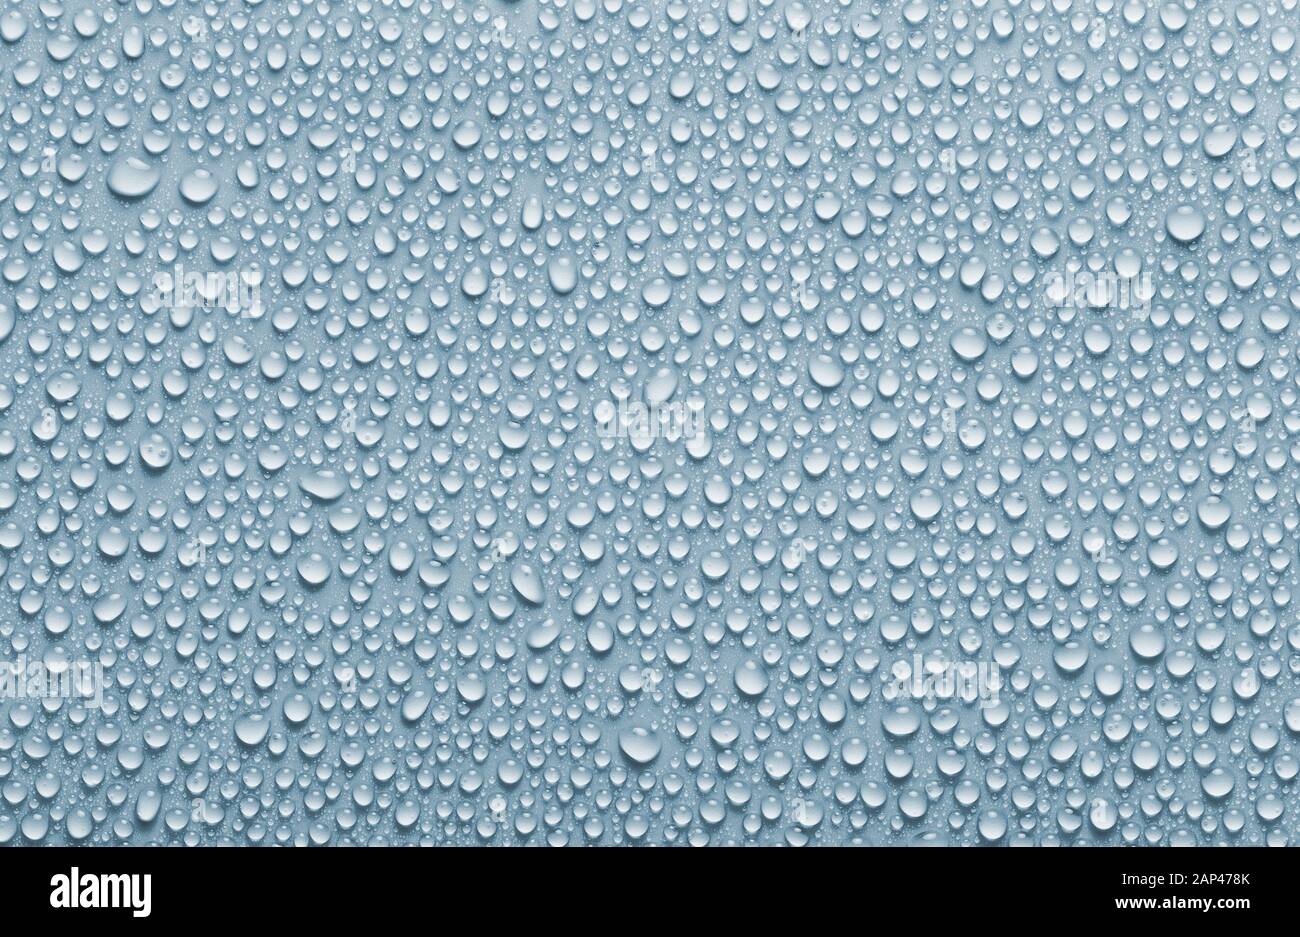 Rain drops background, blue colored water drops texture Stock Photo